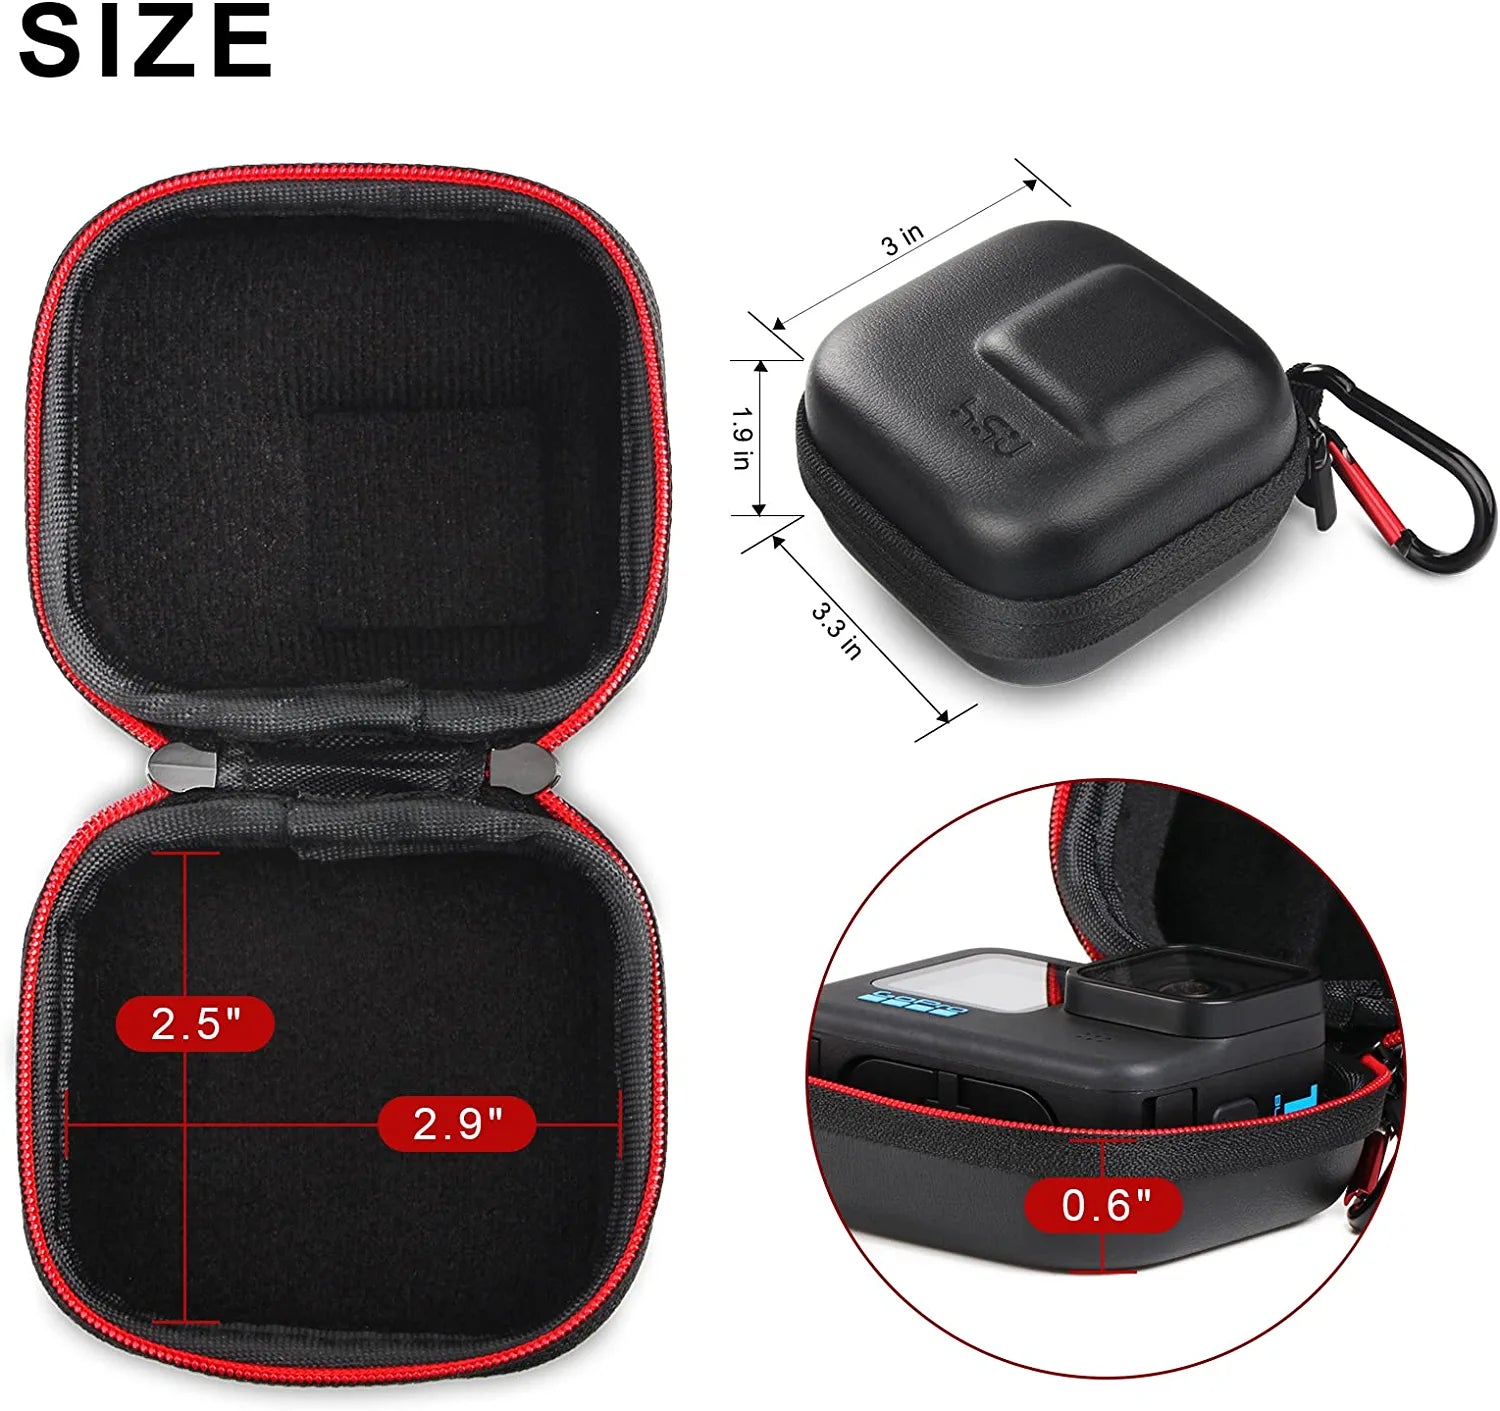 Mini Carrying Case Compatible with Gopro Hero 11/10/9/8/7/(2018)/6/5 Black,Session 5/4,Hero 3+,Akaso/Campark/Yi Action Camera and More，Protective Security Bag by